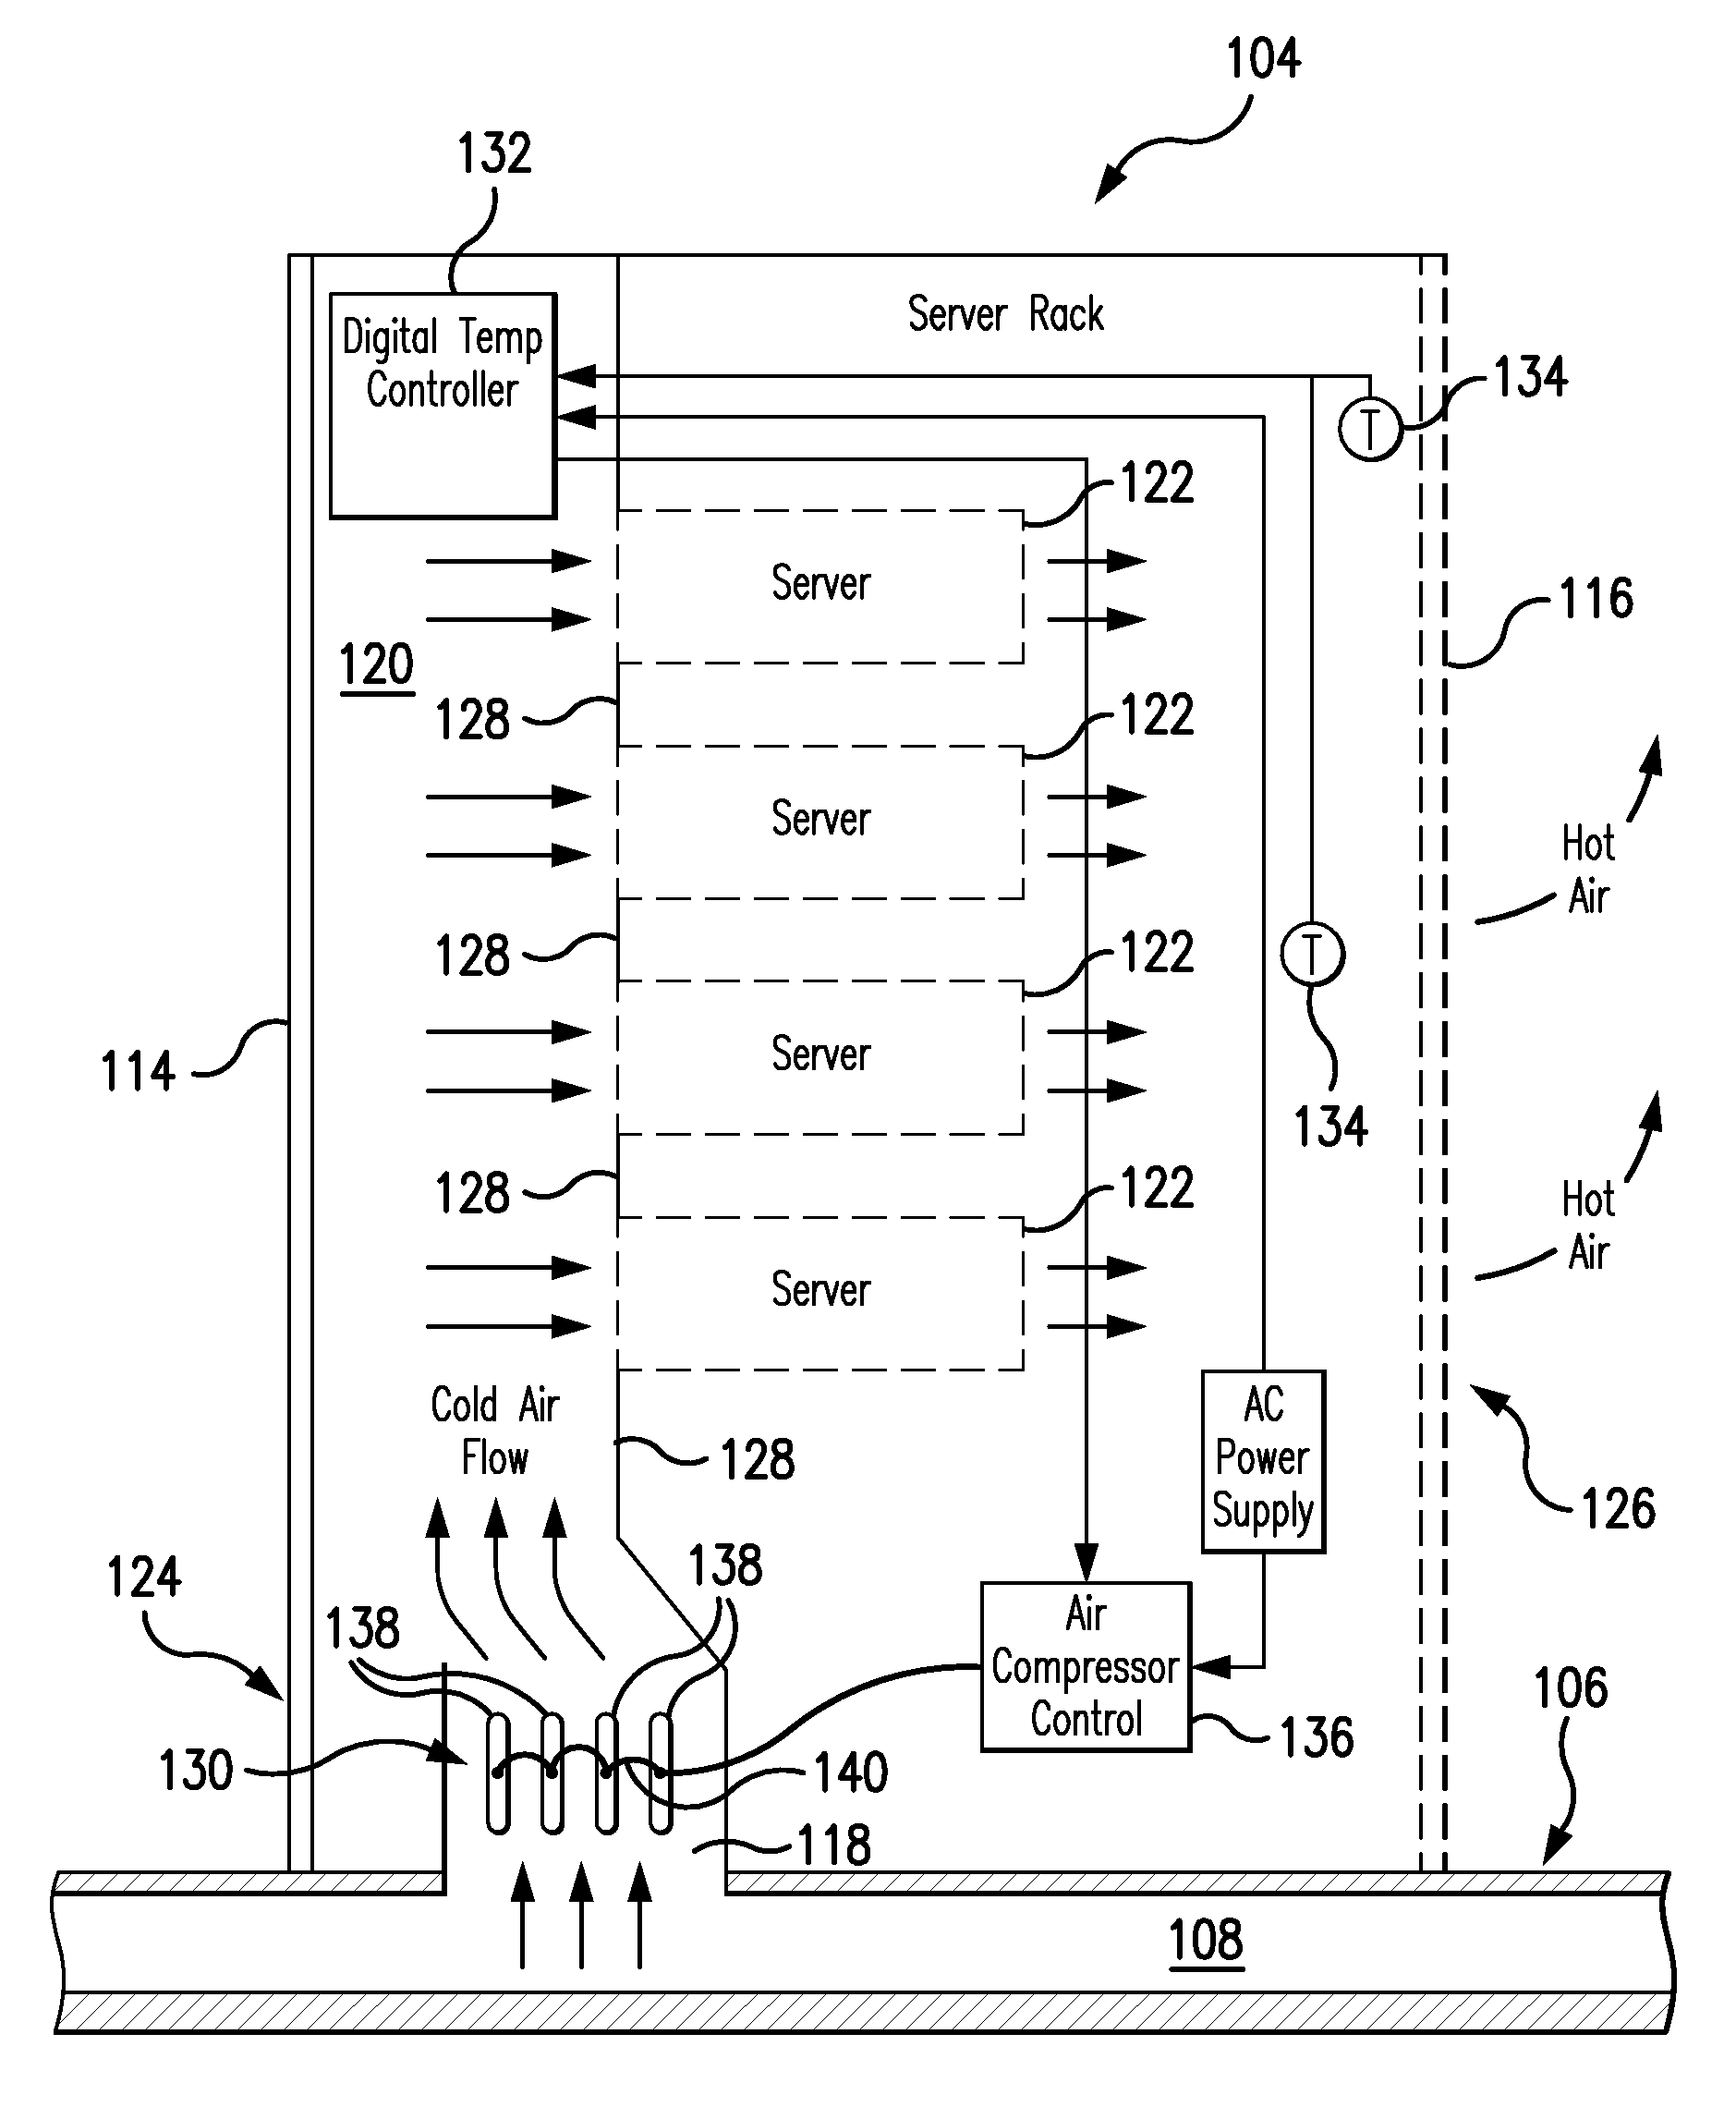 Cooling System for a Computer Server Cabinet in a Data Center